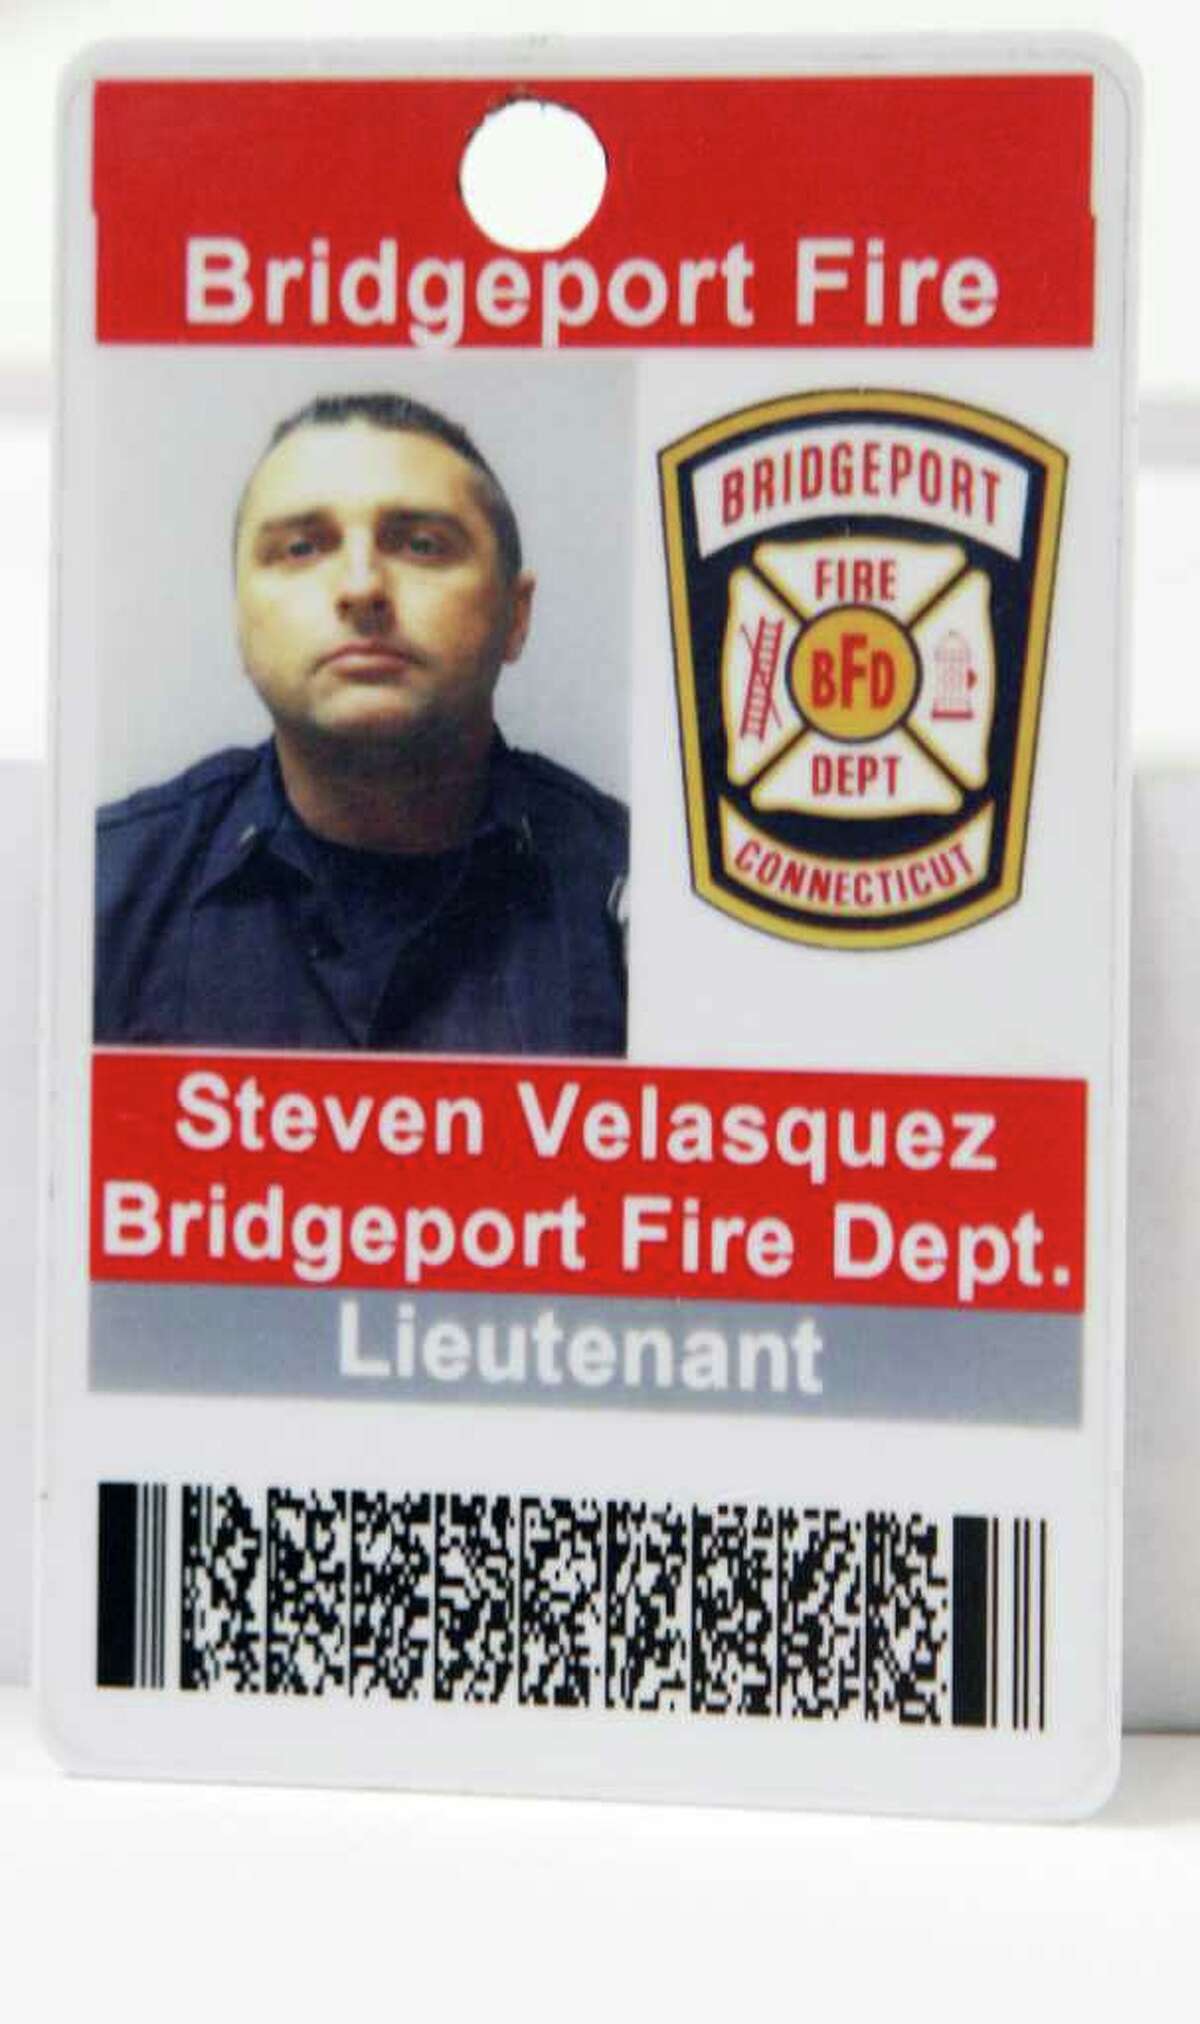 Bridgeport Lt. Steven Velasquez died while fighting a fire at 41 Elmwood Ave on Saturday, July 24, 2010. Michel Baik also died. They were found unconscious on the third floor of a three story home and transported to hospitals, where they were pronounced dead.